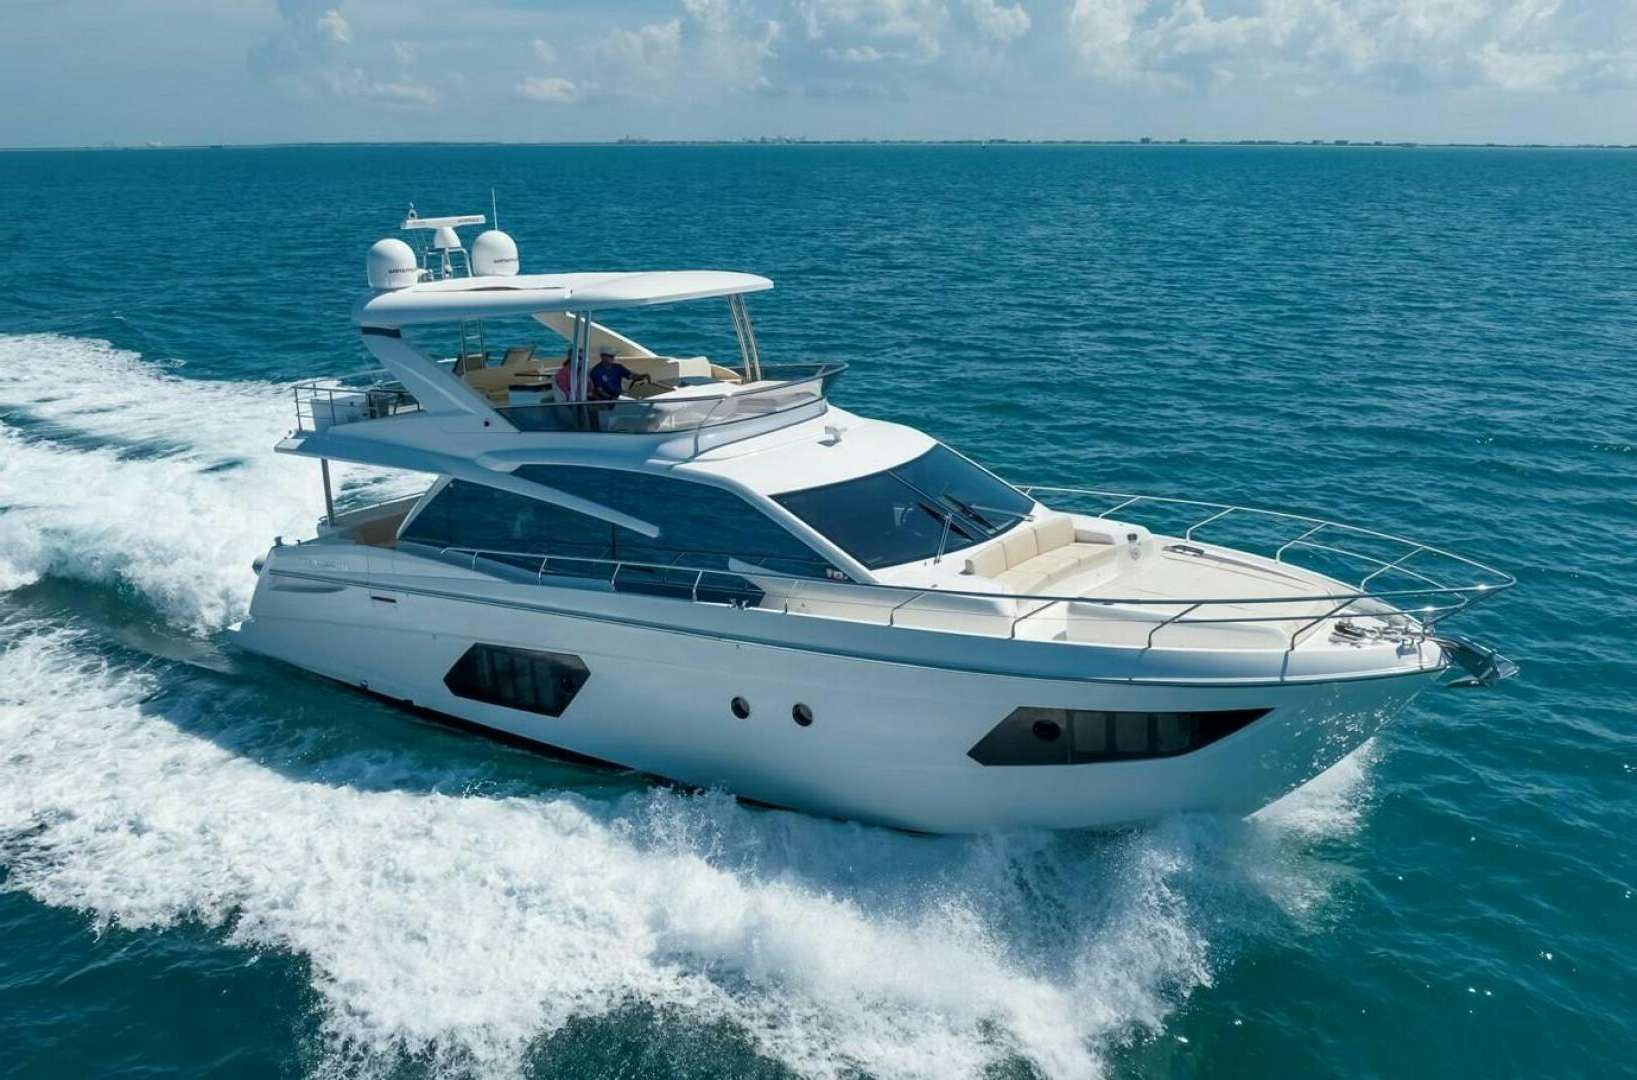 4 SEASONS Yacht for Sale in Cape Canaveral, 60' 4 (18.39m) 2018 Absolute